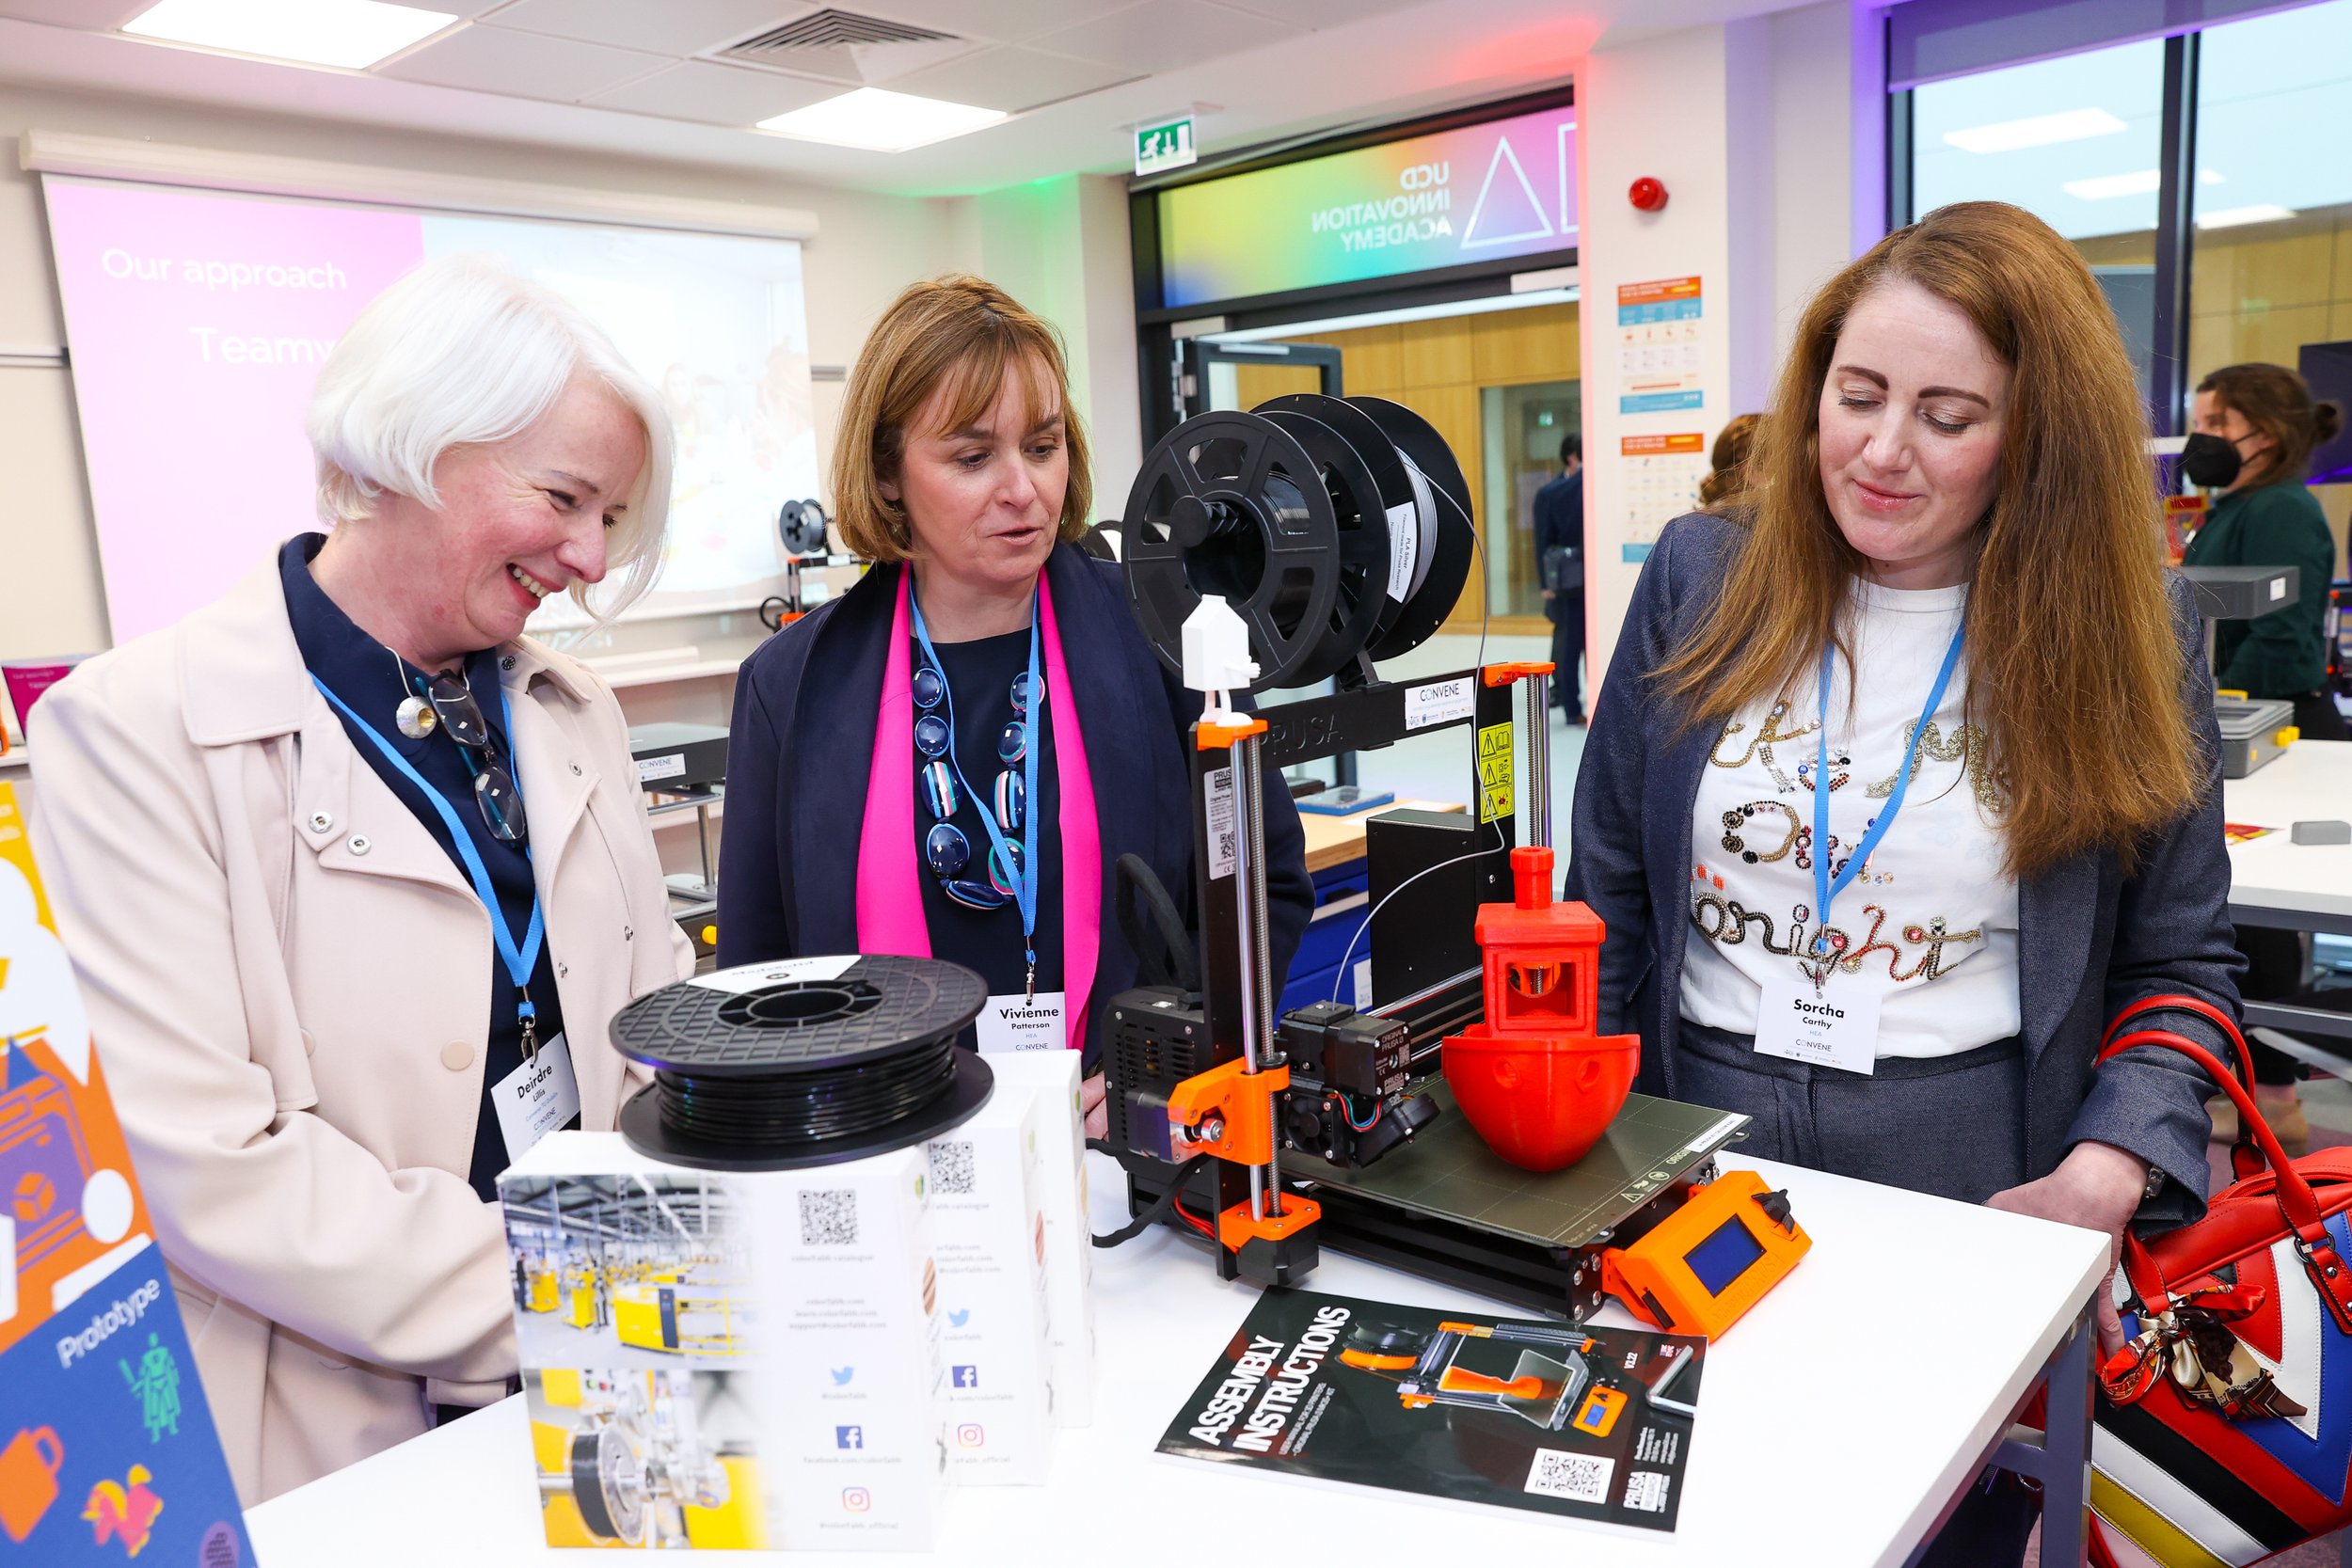  Dr Deirdre Lillis, TU Dublin; Dr Vivienne Patterson, HEA and Sorcha Carthy, HEA in UCD Innovation Academy’s Convene MakerSpace where multidisciplinary groups of students learn future skills. 